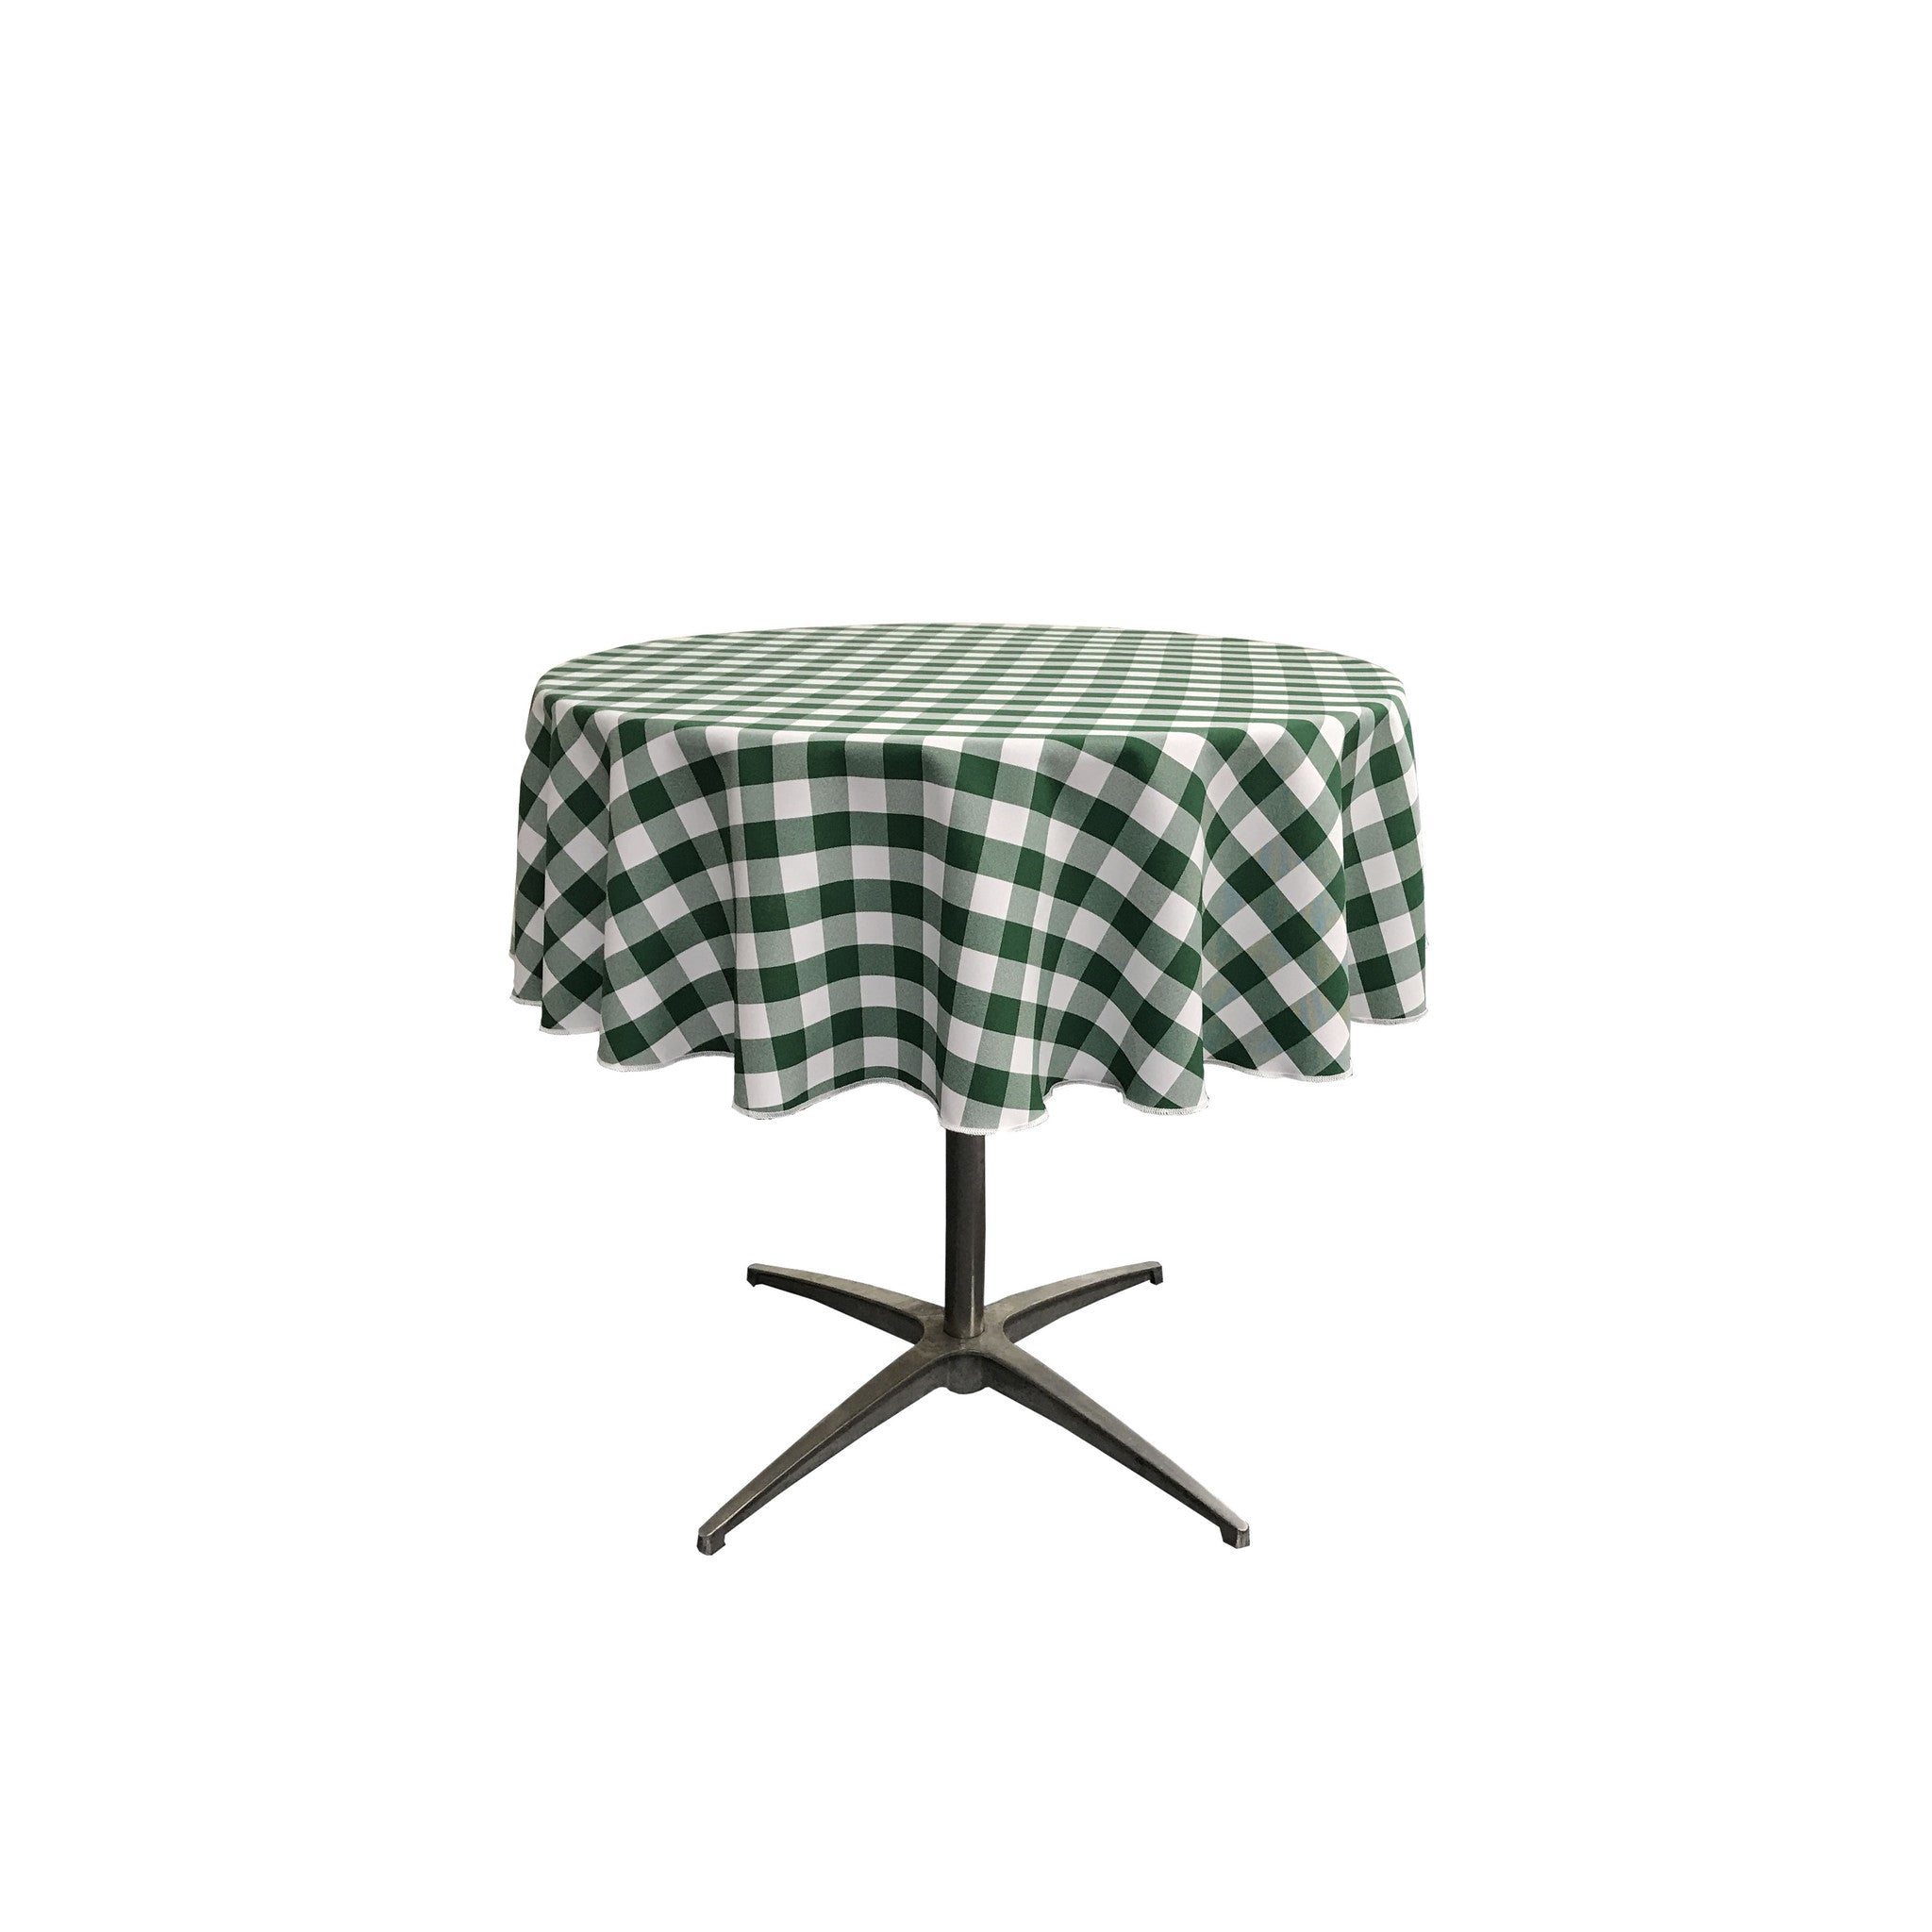 Gingham Checkered Round 51" Tablecloth